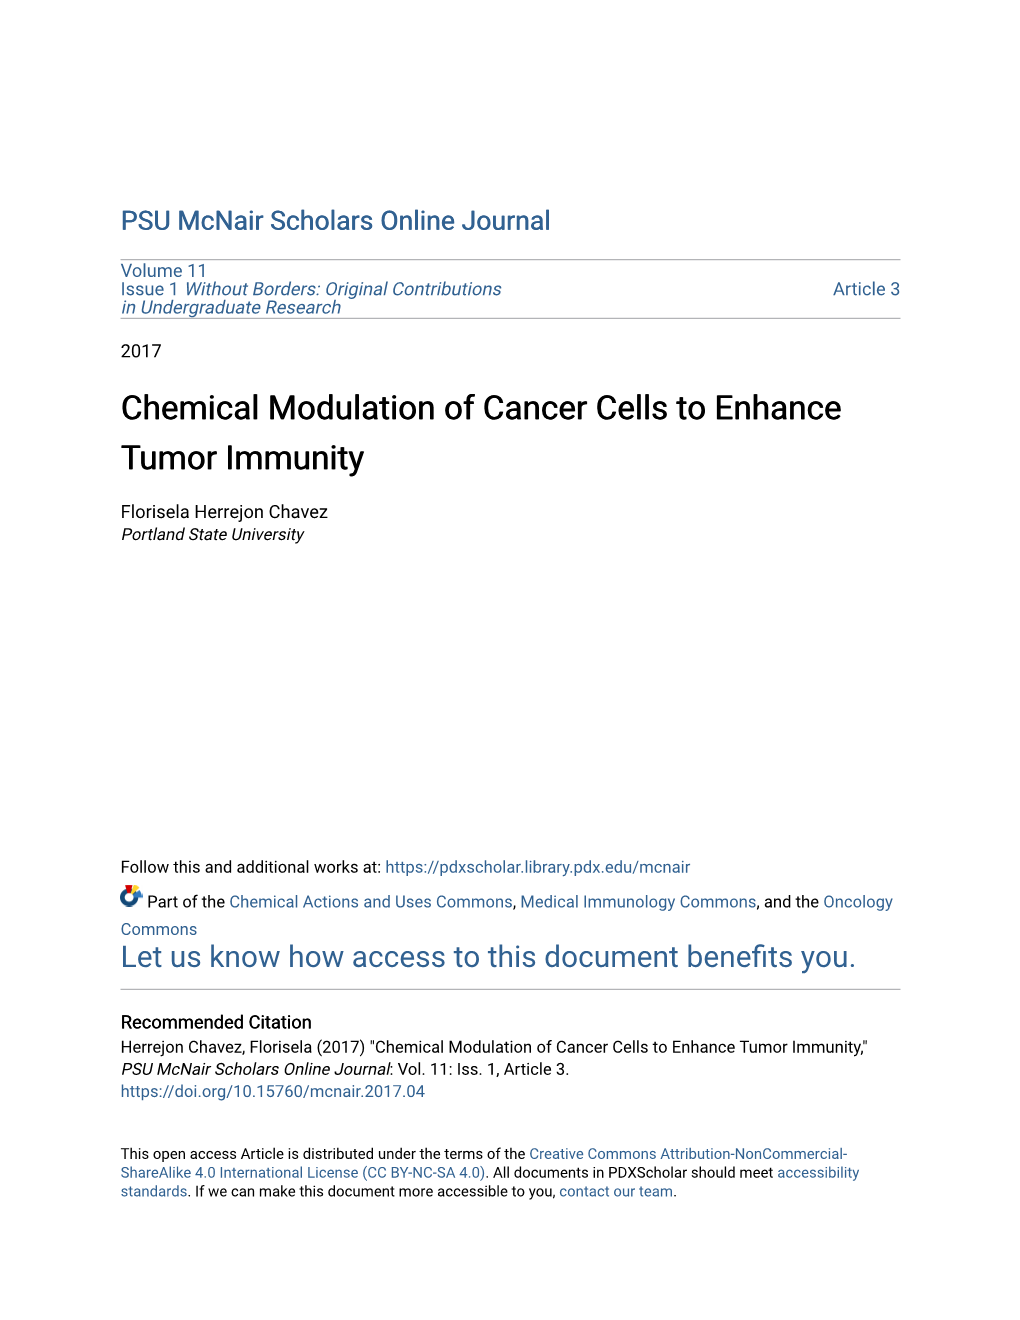 Chemical Modulation of Cancer Cells to Enhance Tumor Immunity